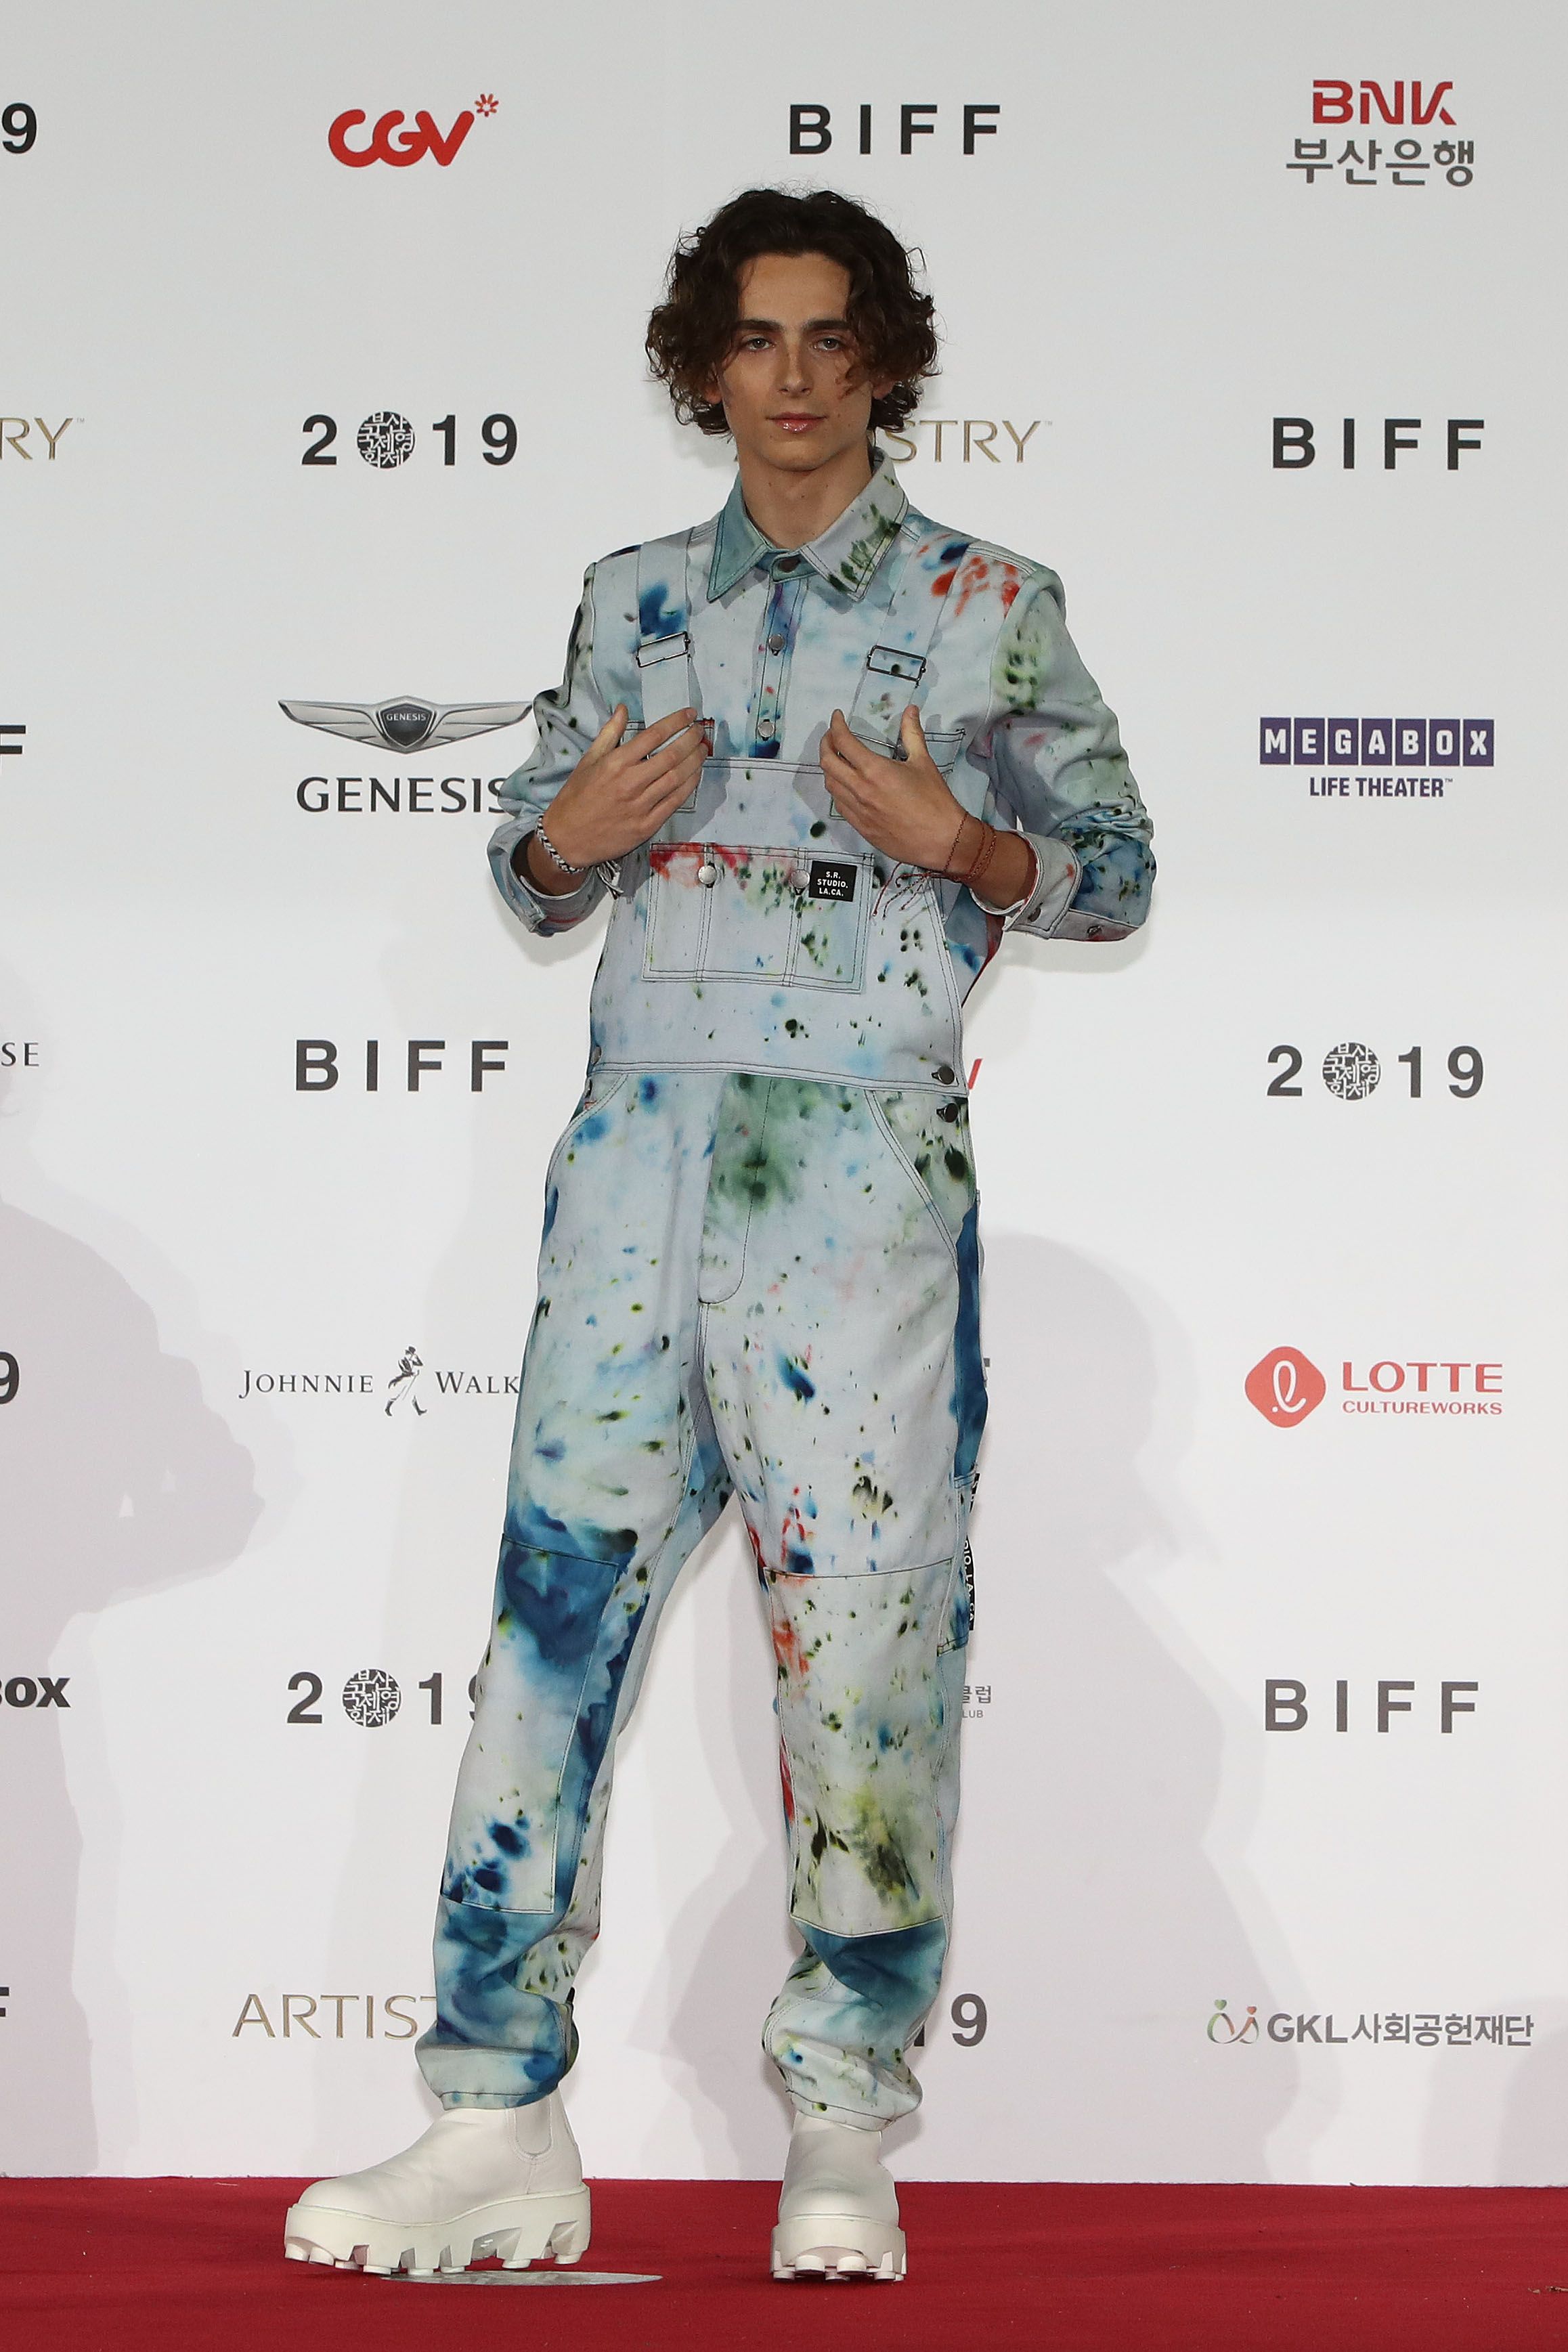 Whats The Deal With Timothee Chalamet Paris Keychain?